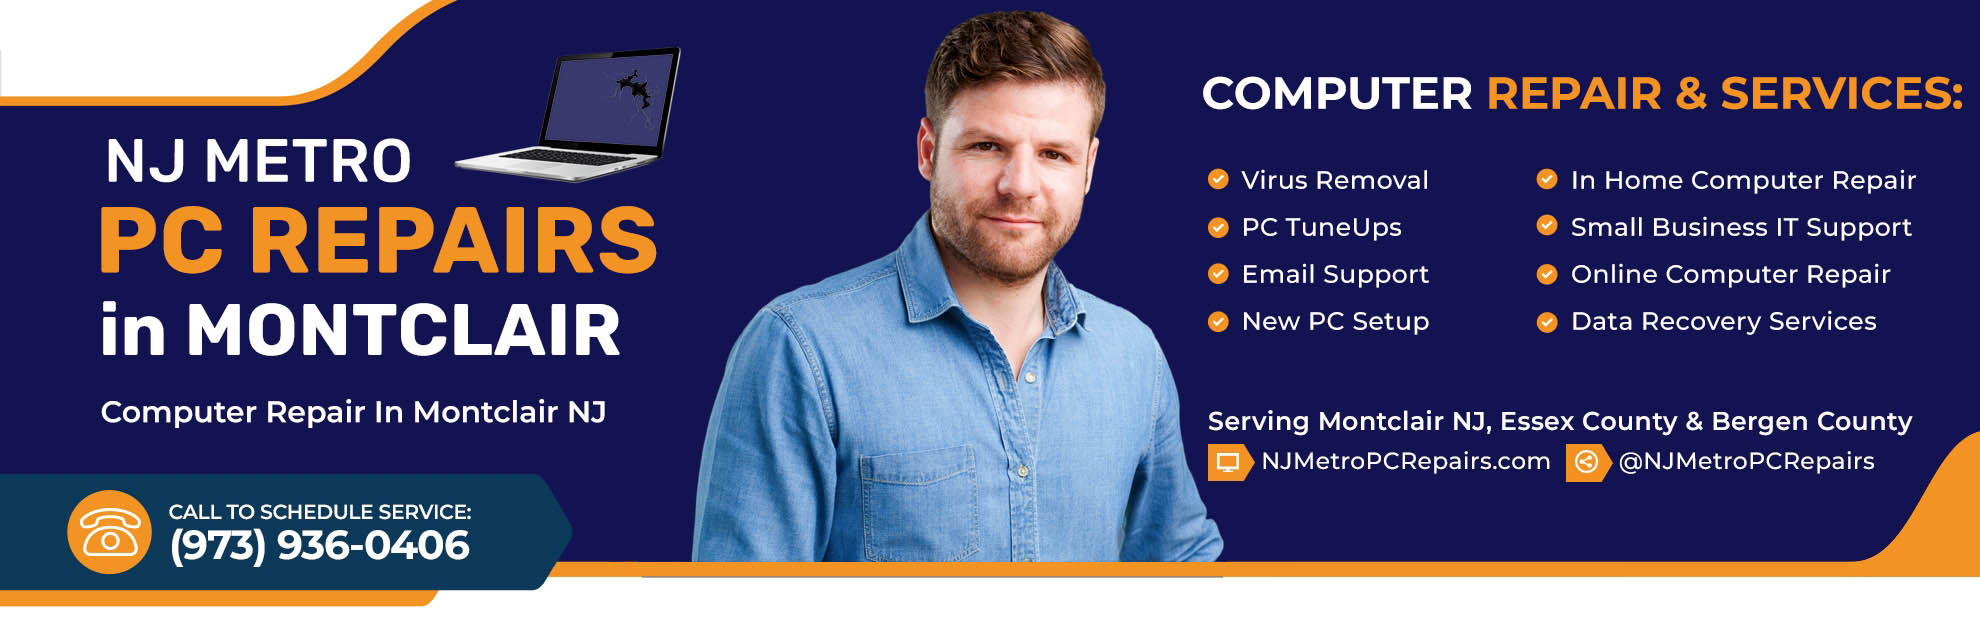 Homepage banner with confident smiling computer technician and a list of their computer repair services in Montclair